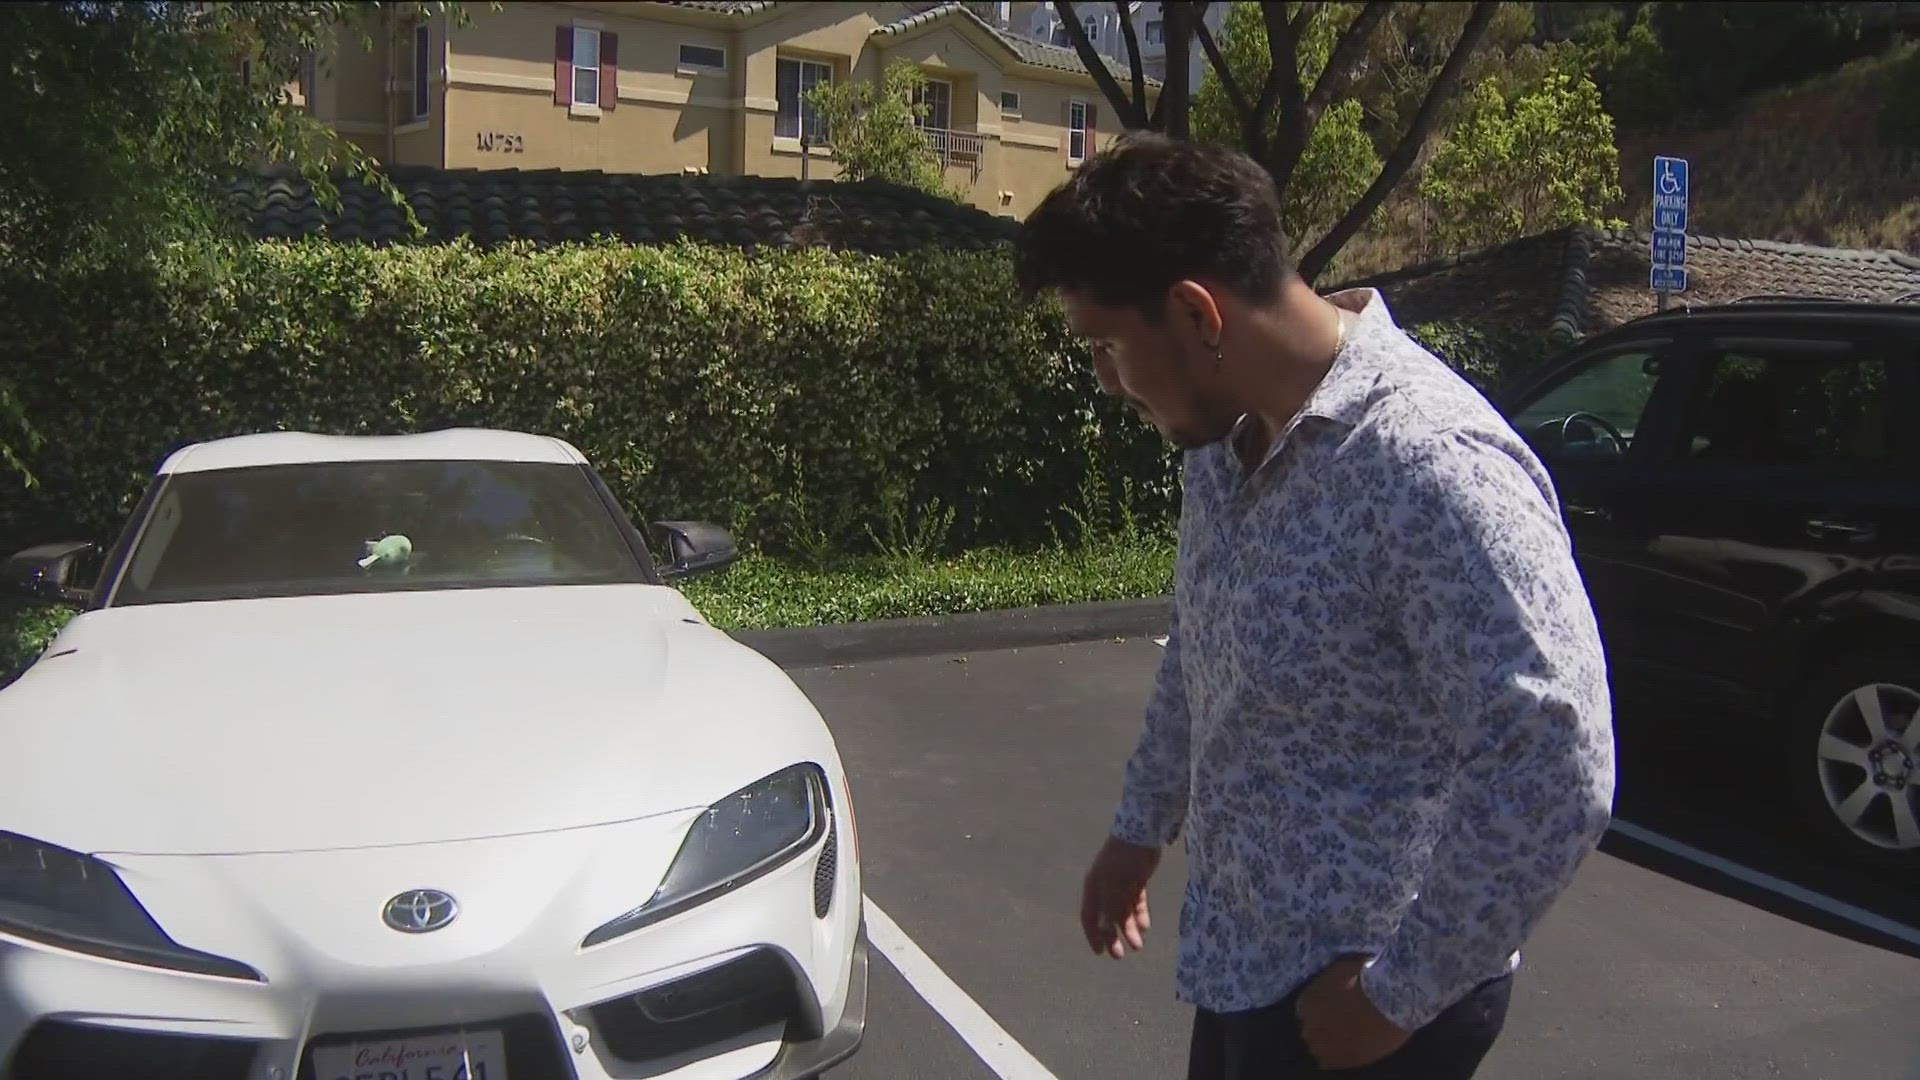 CBS 8 looks at auto fraud at El Cajon used car dealerships and offers advice on how not to get taken for a ride.